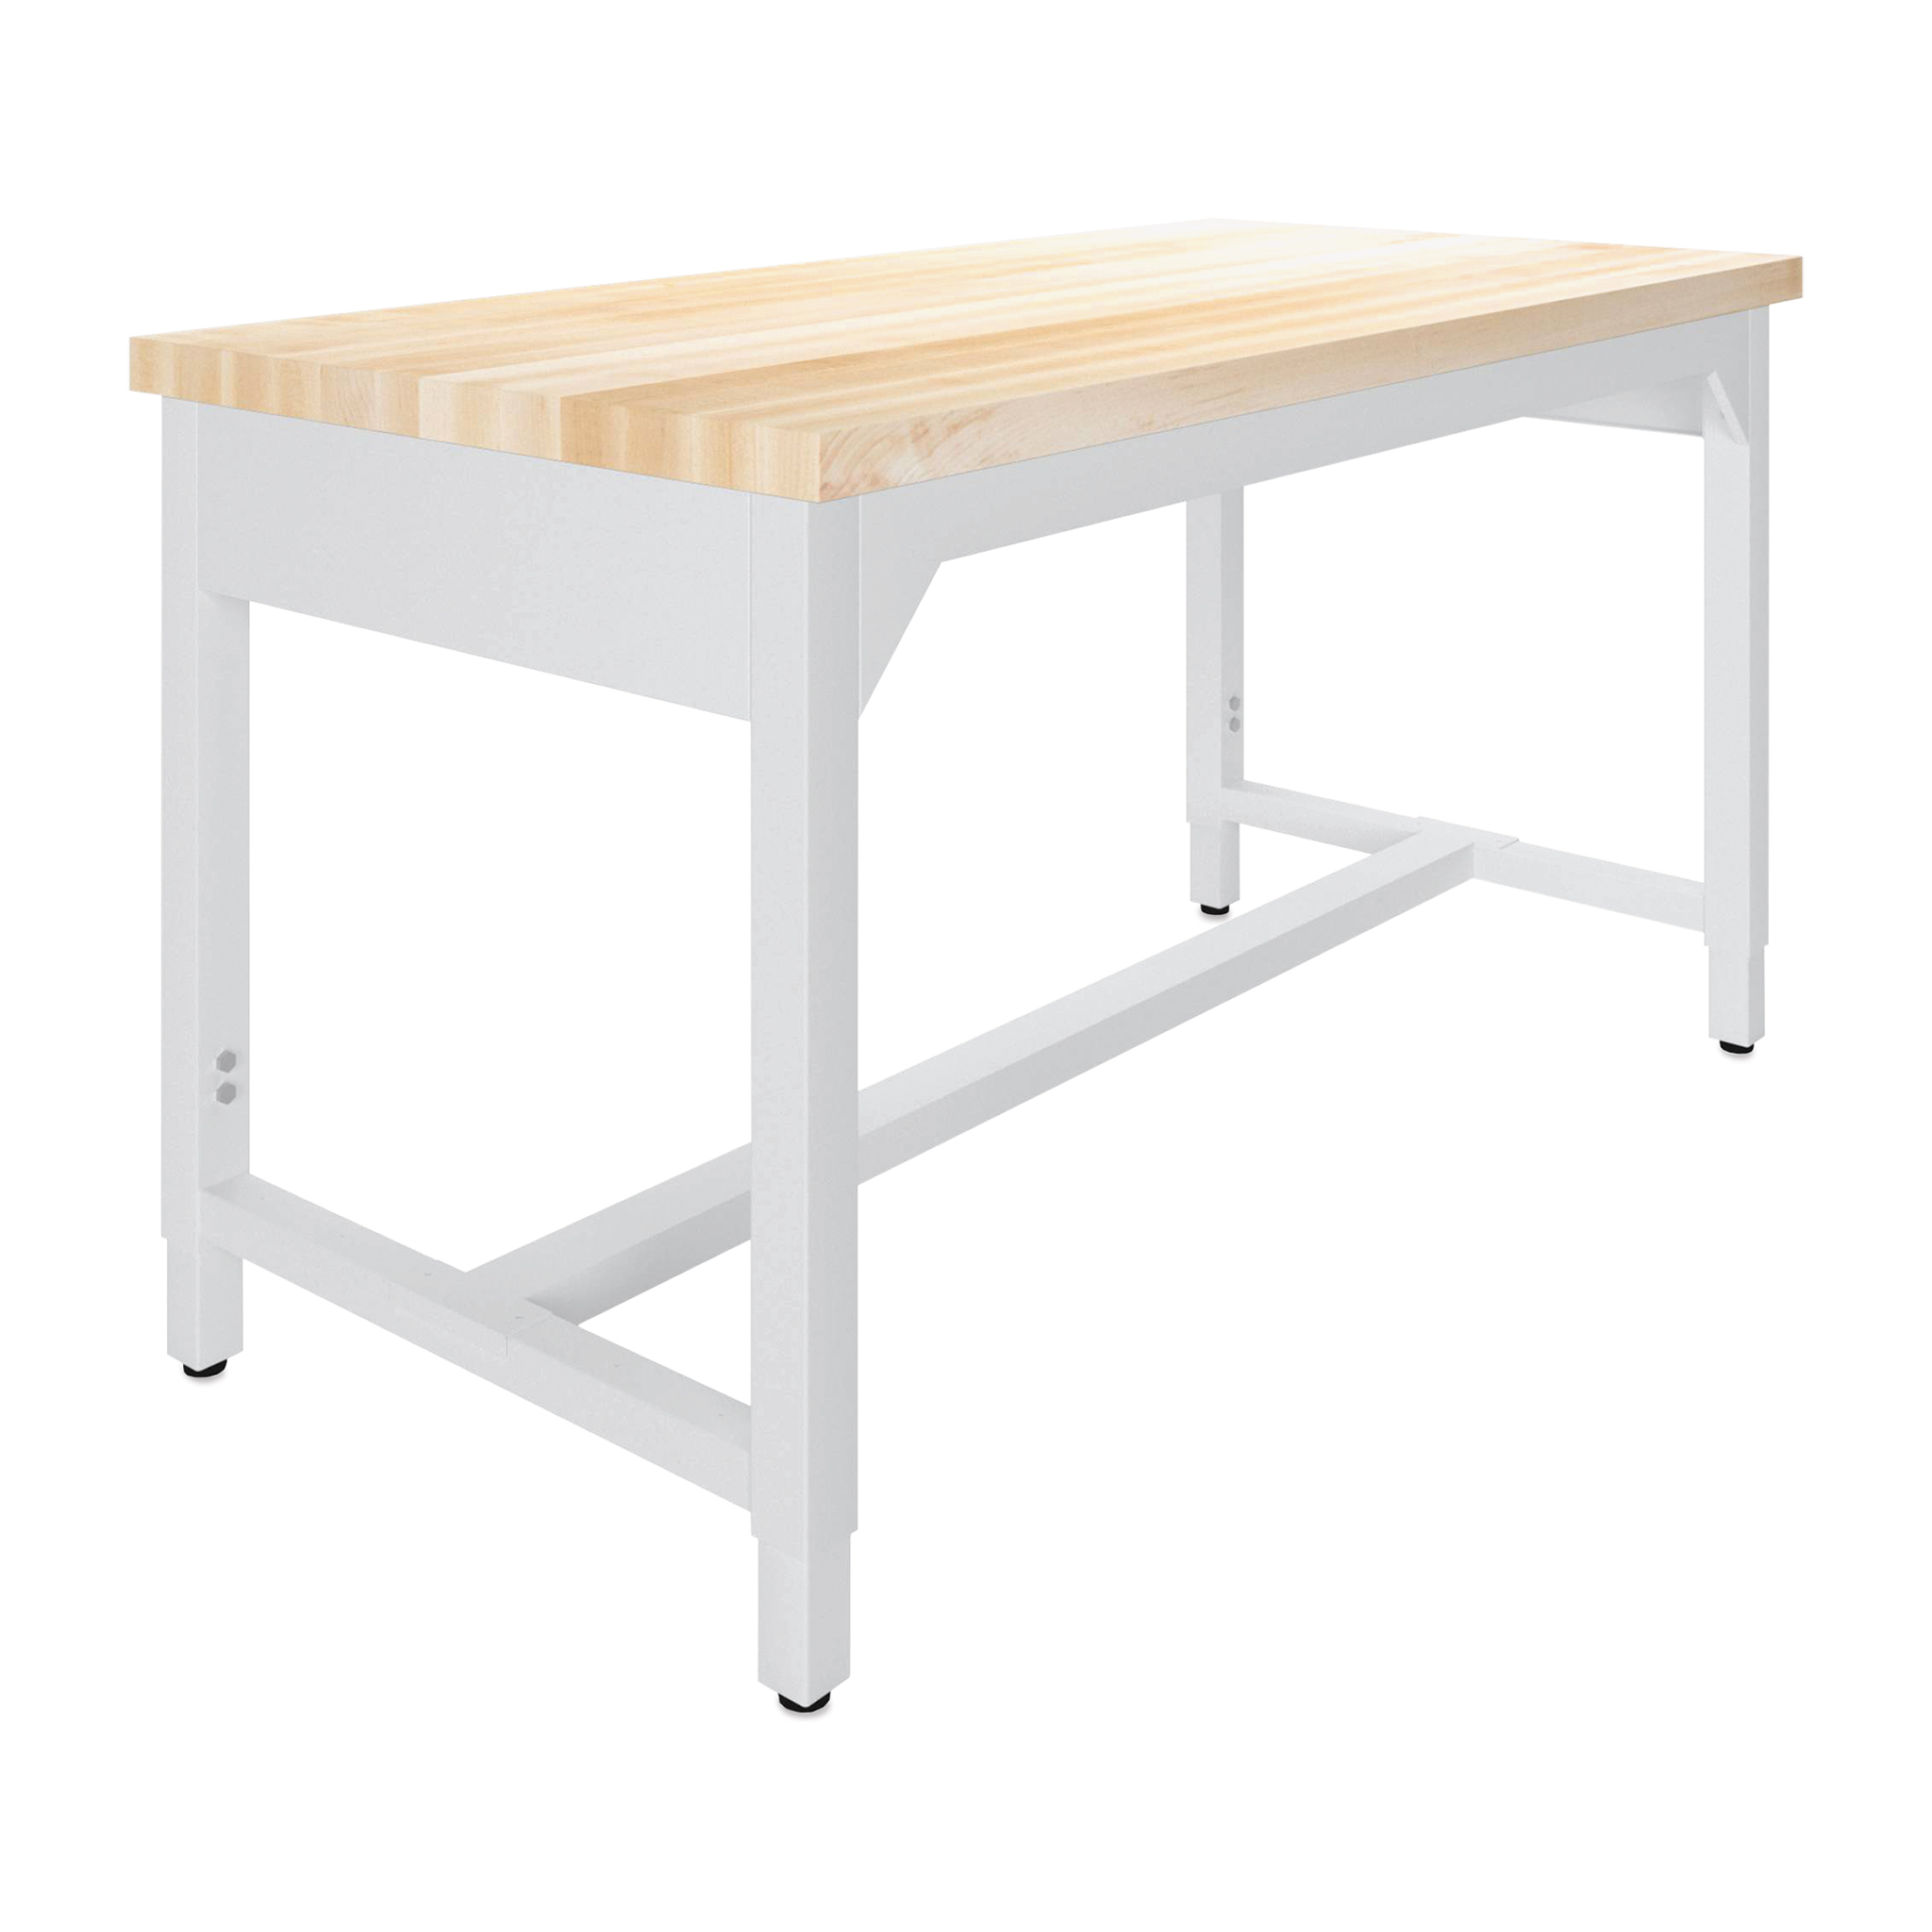 Diversified Spaces Fab-Lab Workbench - Butcher Block Top, 72' x 30'